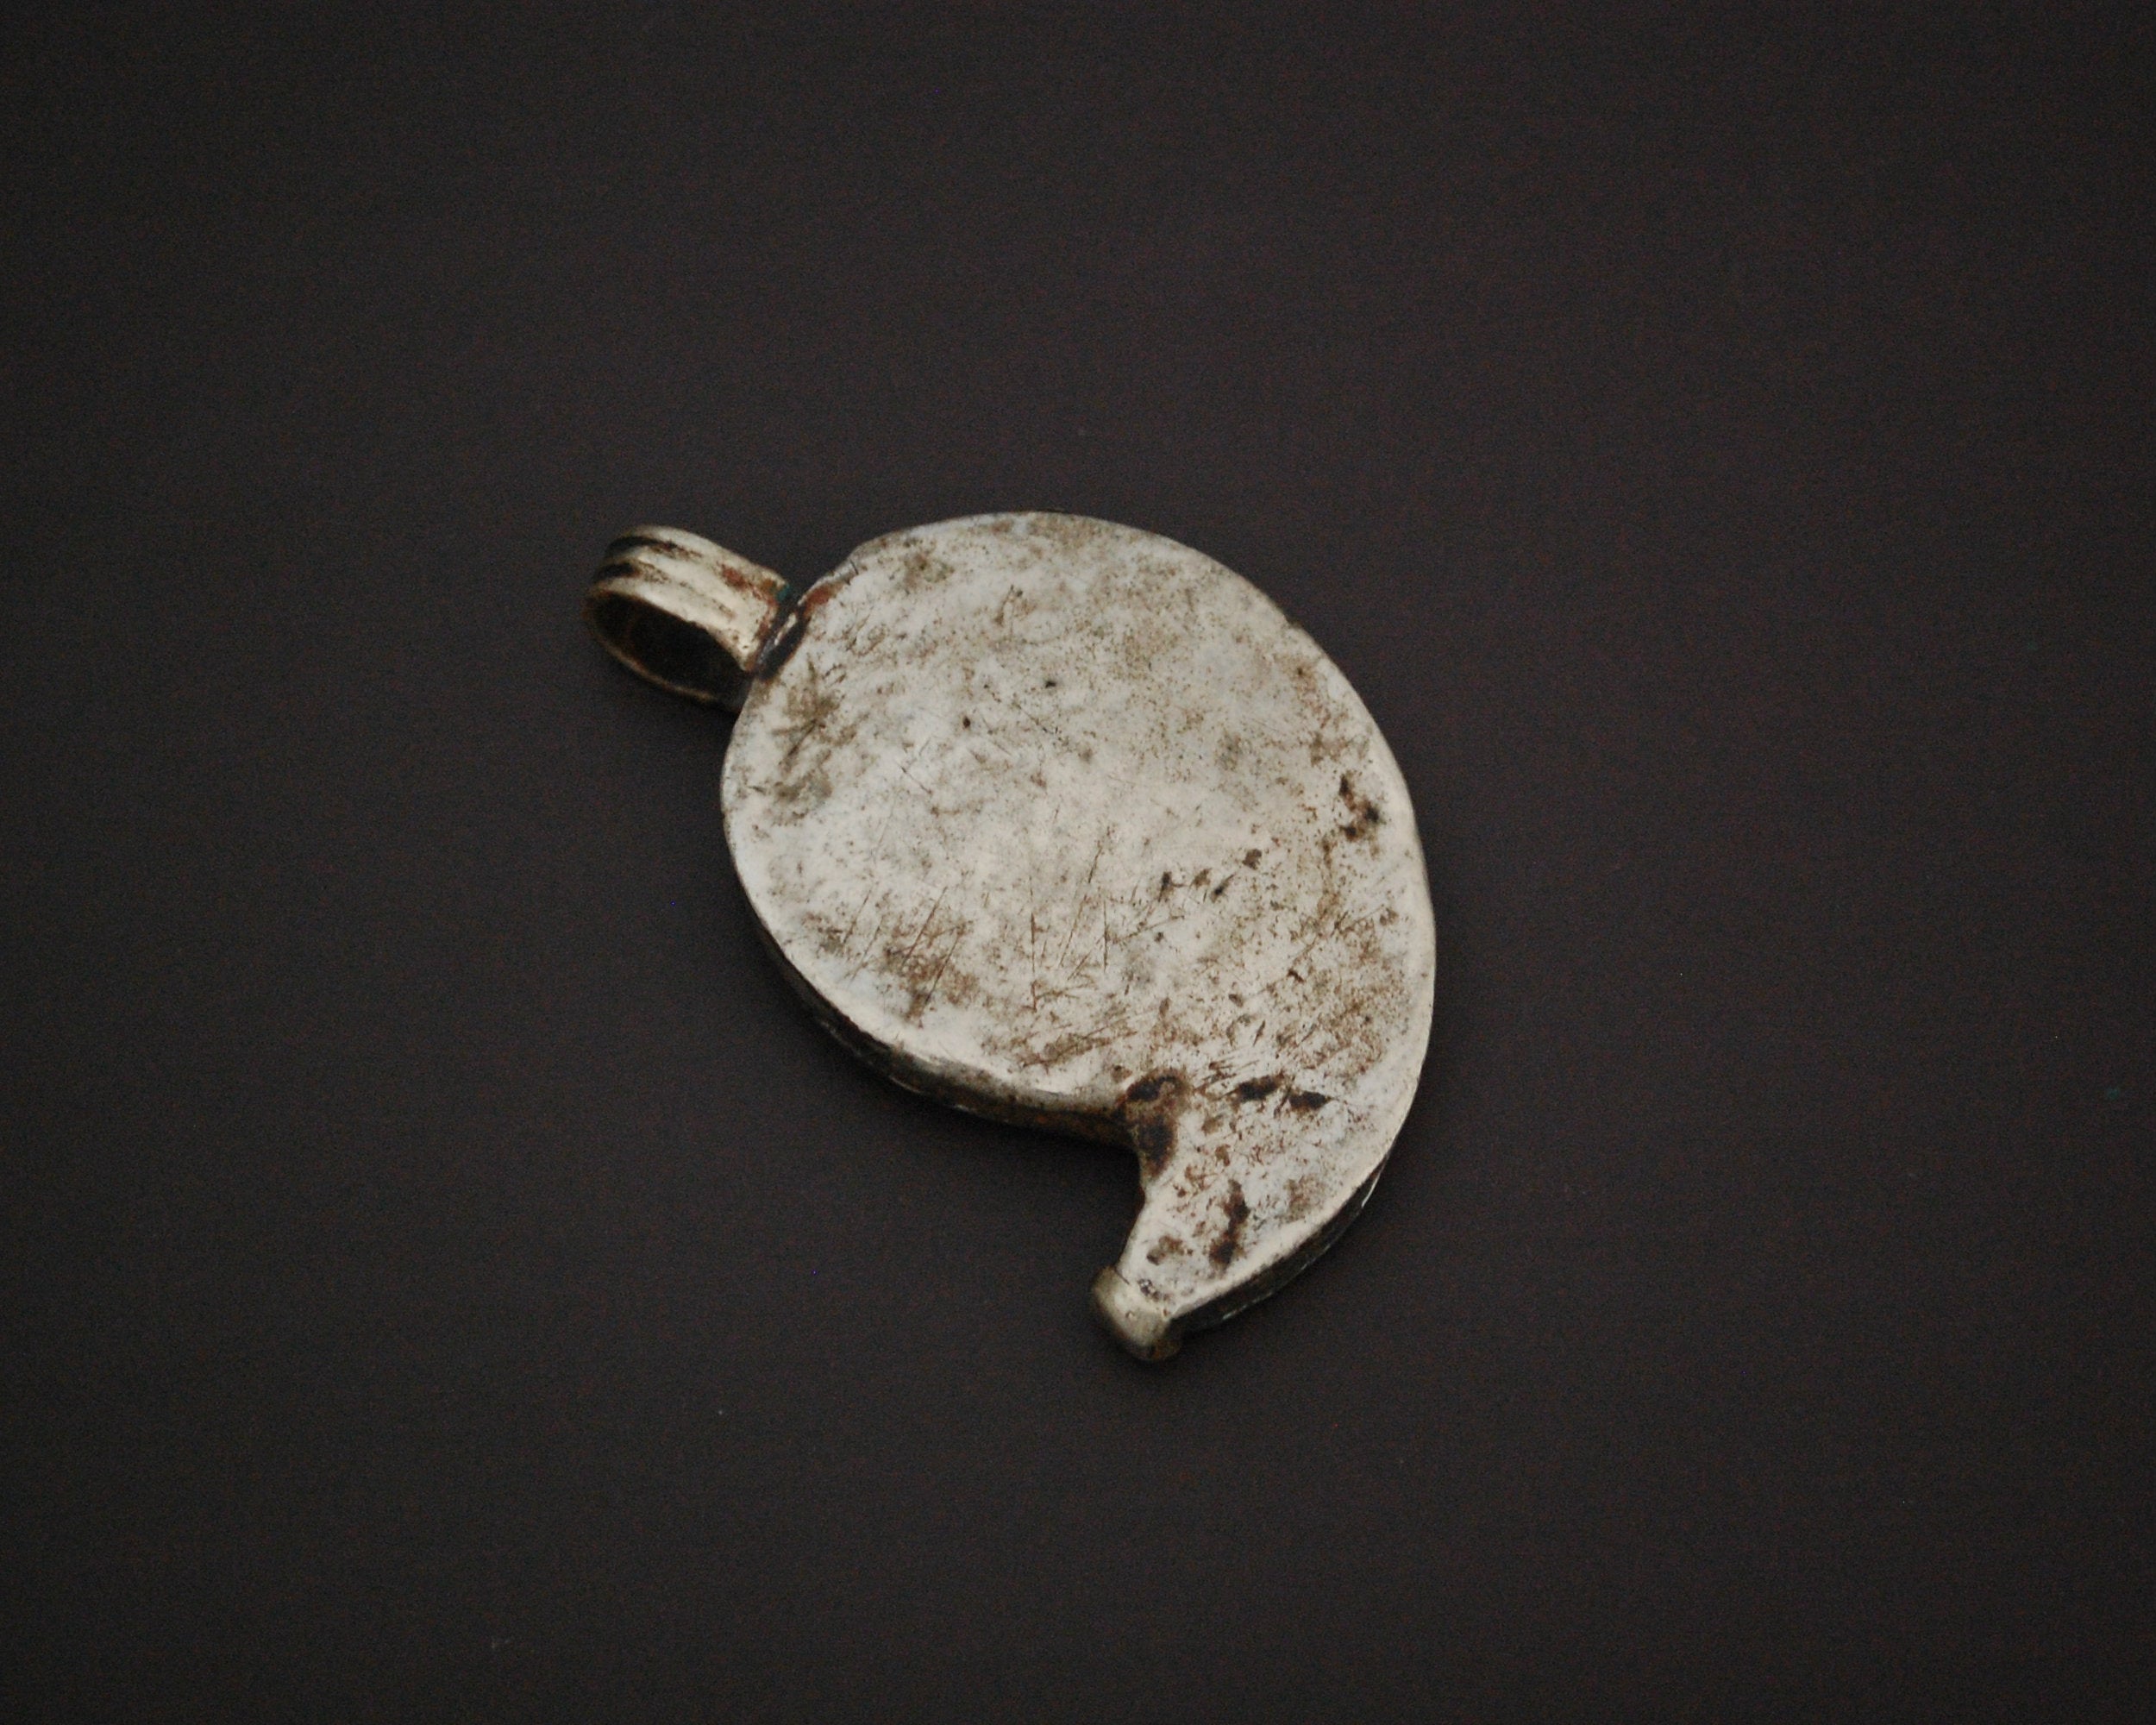 Indian Tribal Paisley Silver Pendant